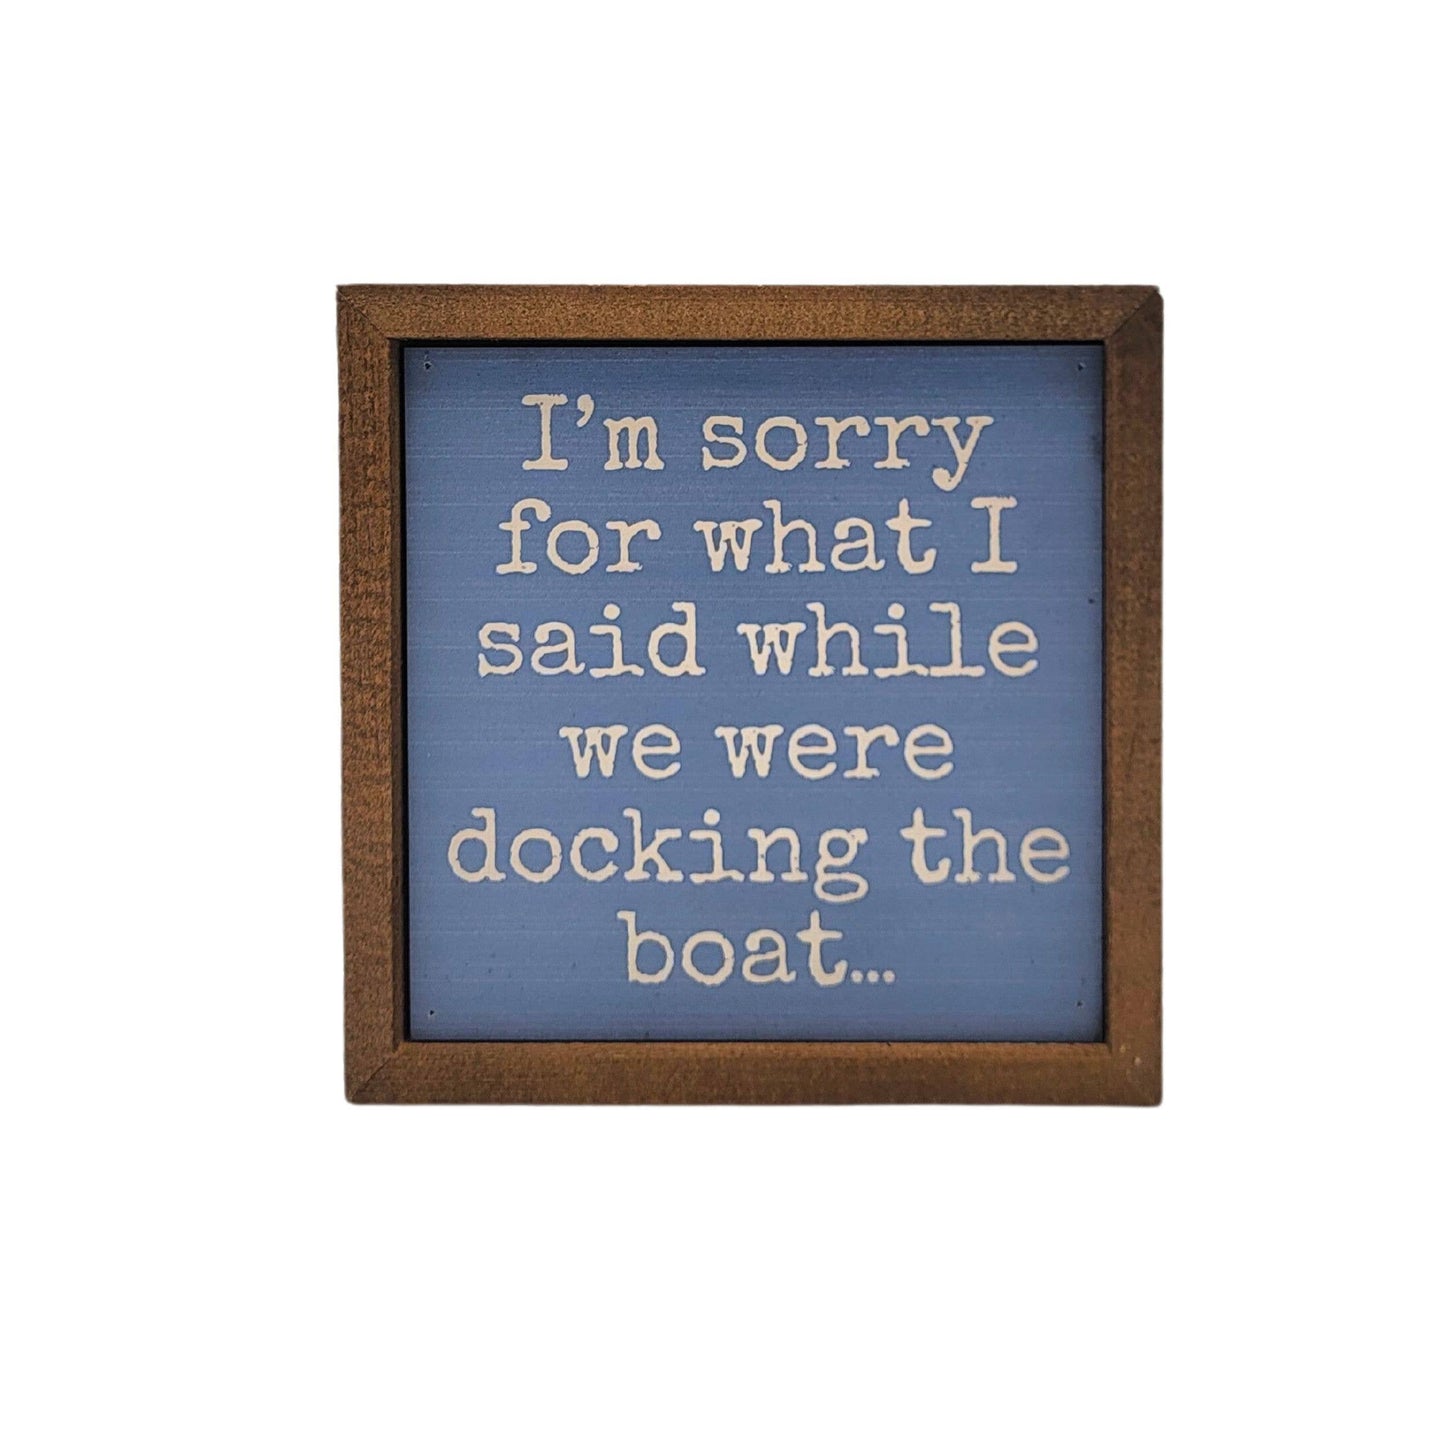 Driftless Studios - I'm Sorry Docking The Boat Funny Cabin Decor Sign